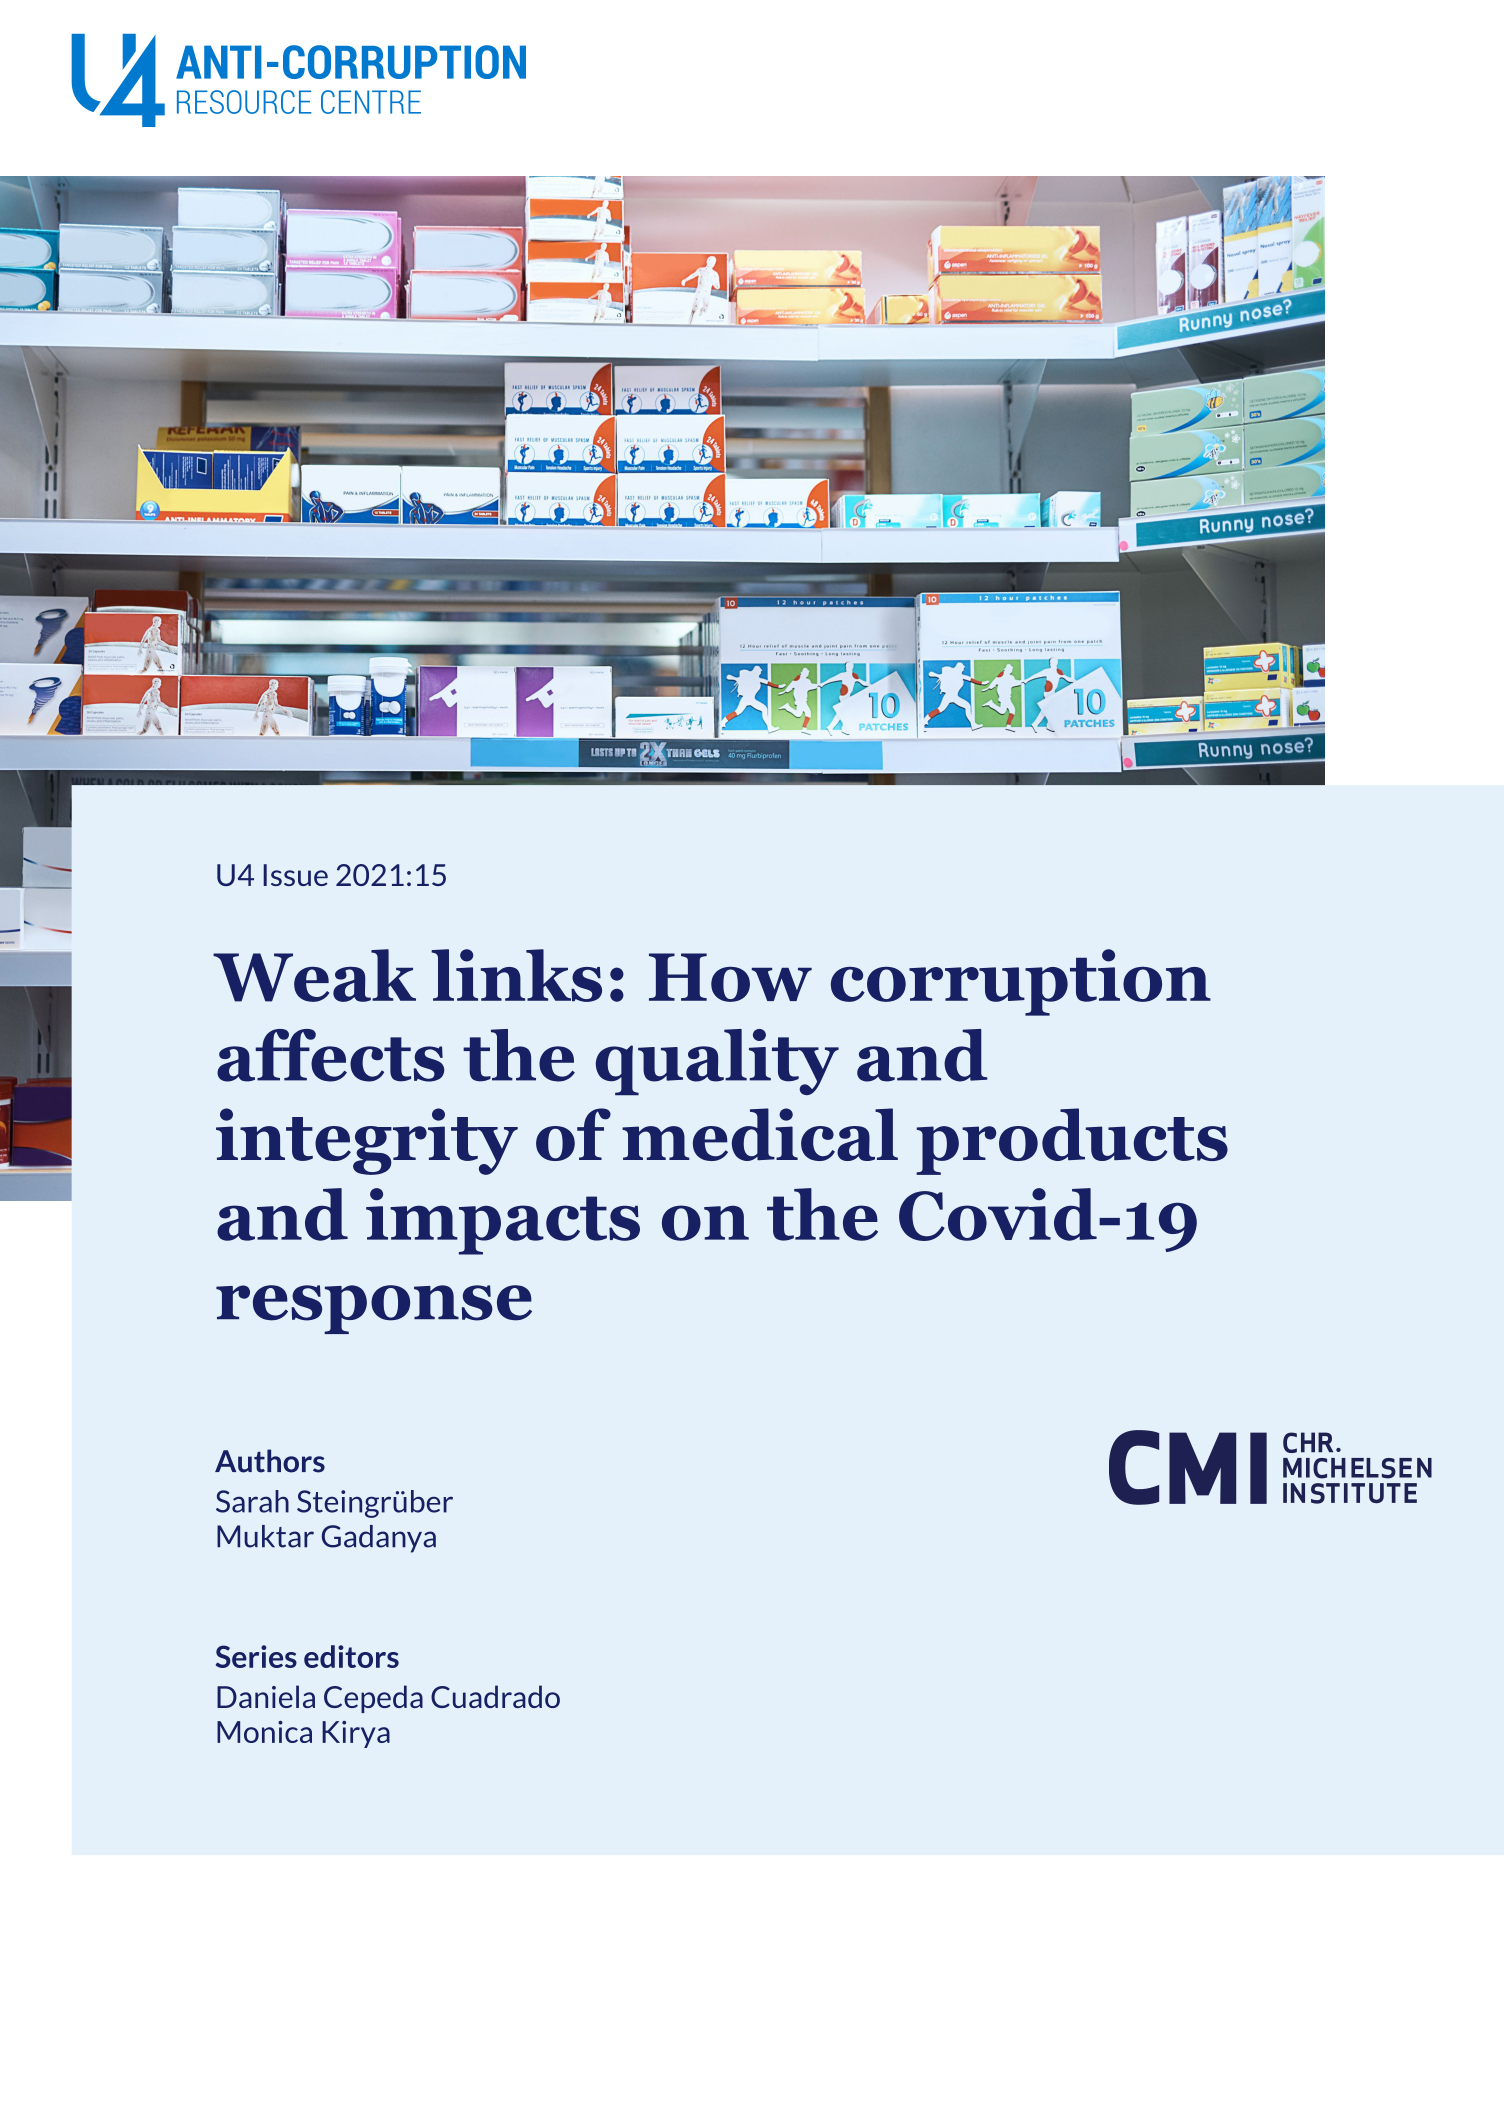 Weak links: How corruption affects the quality and integrity of medical products and impacts on the Covid-19 response